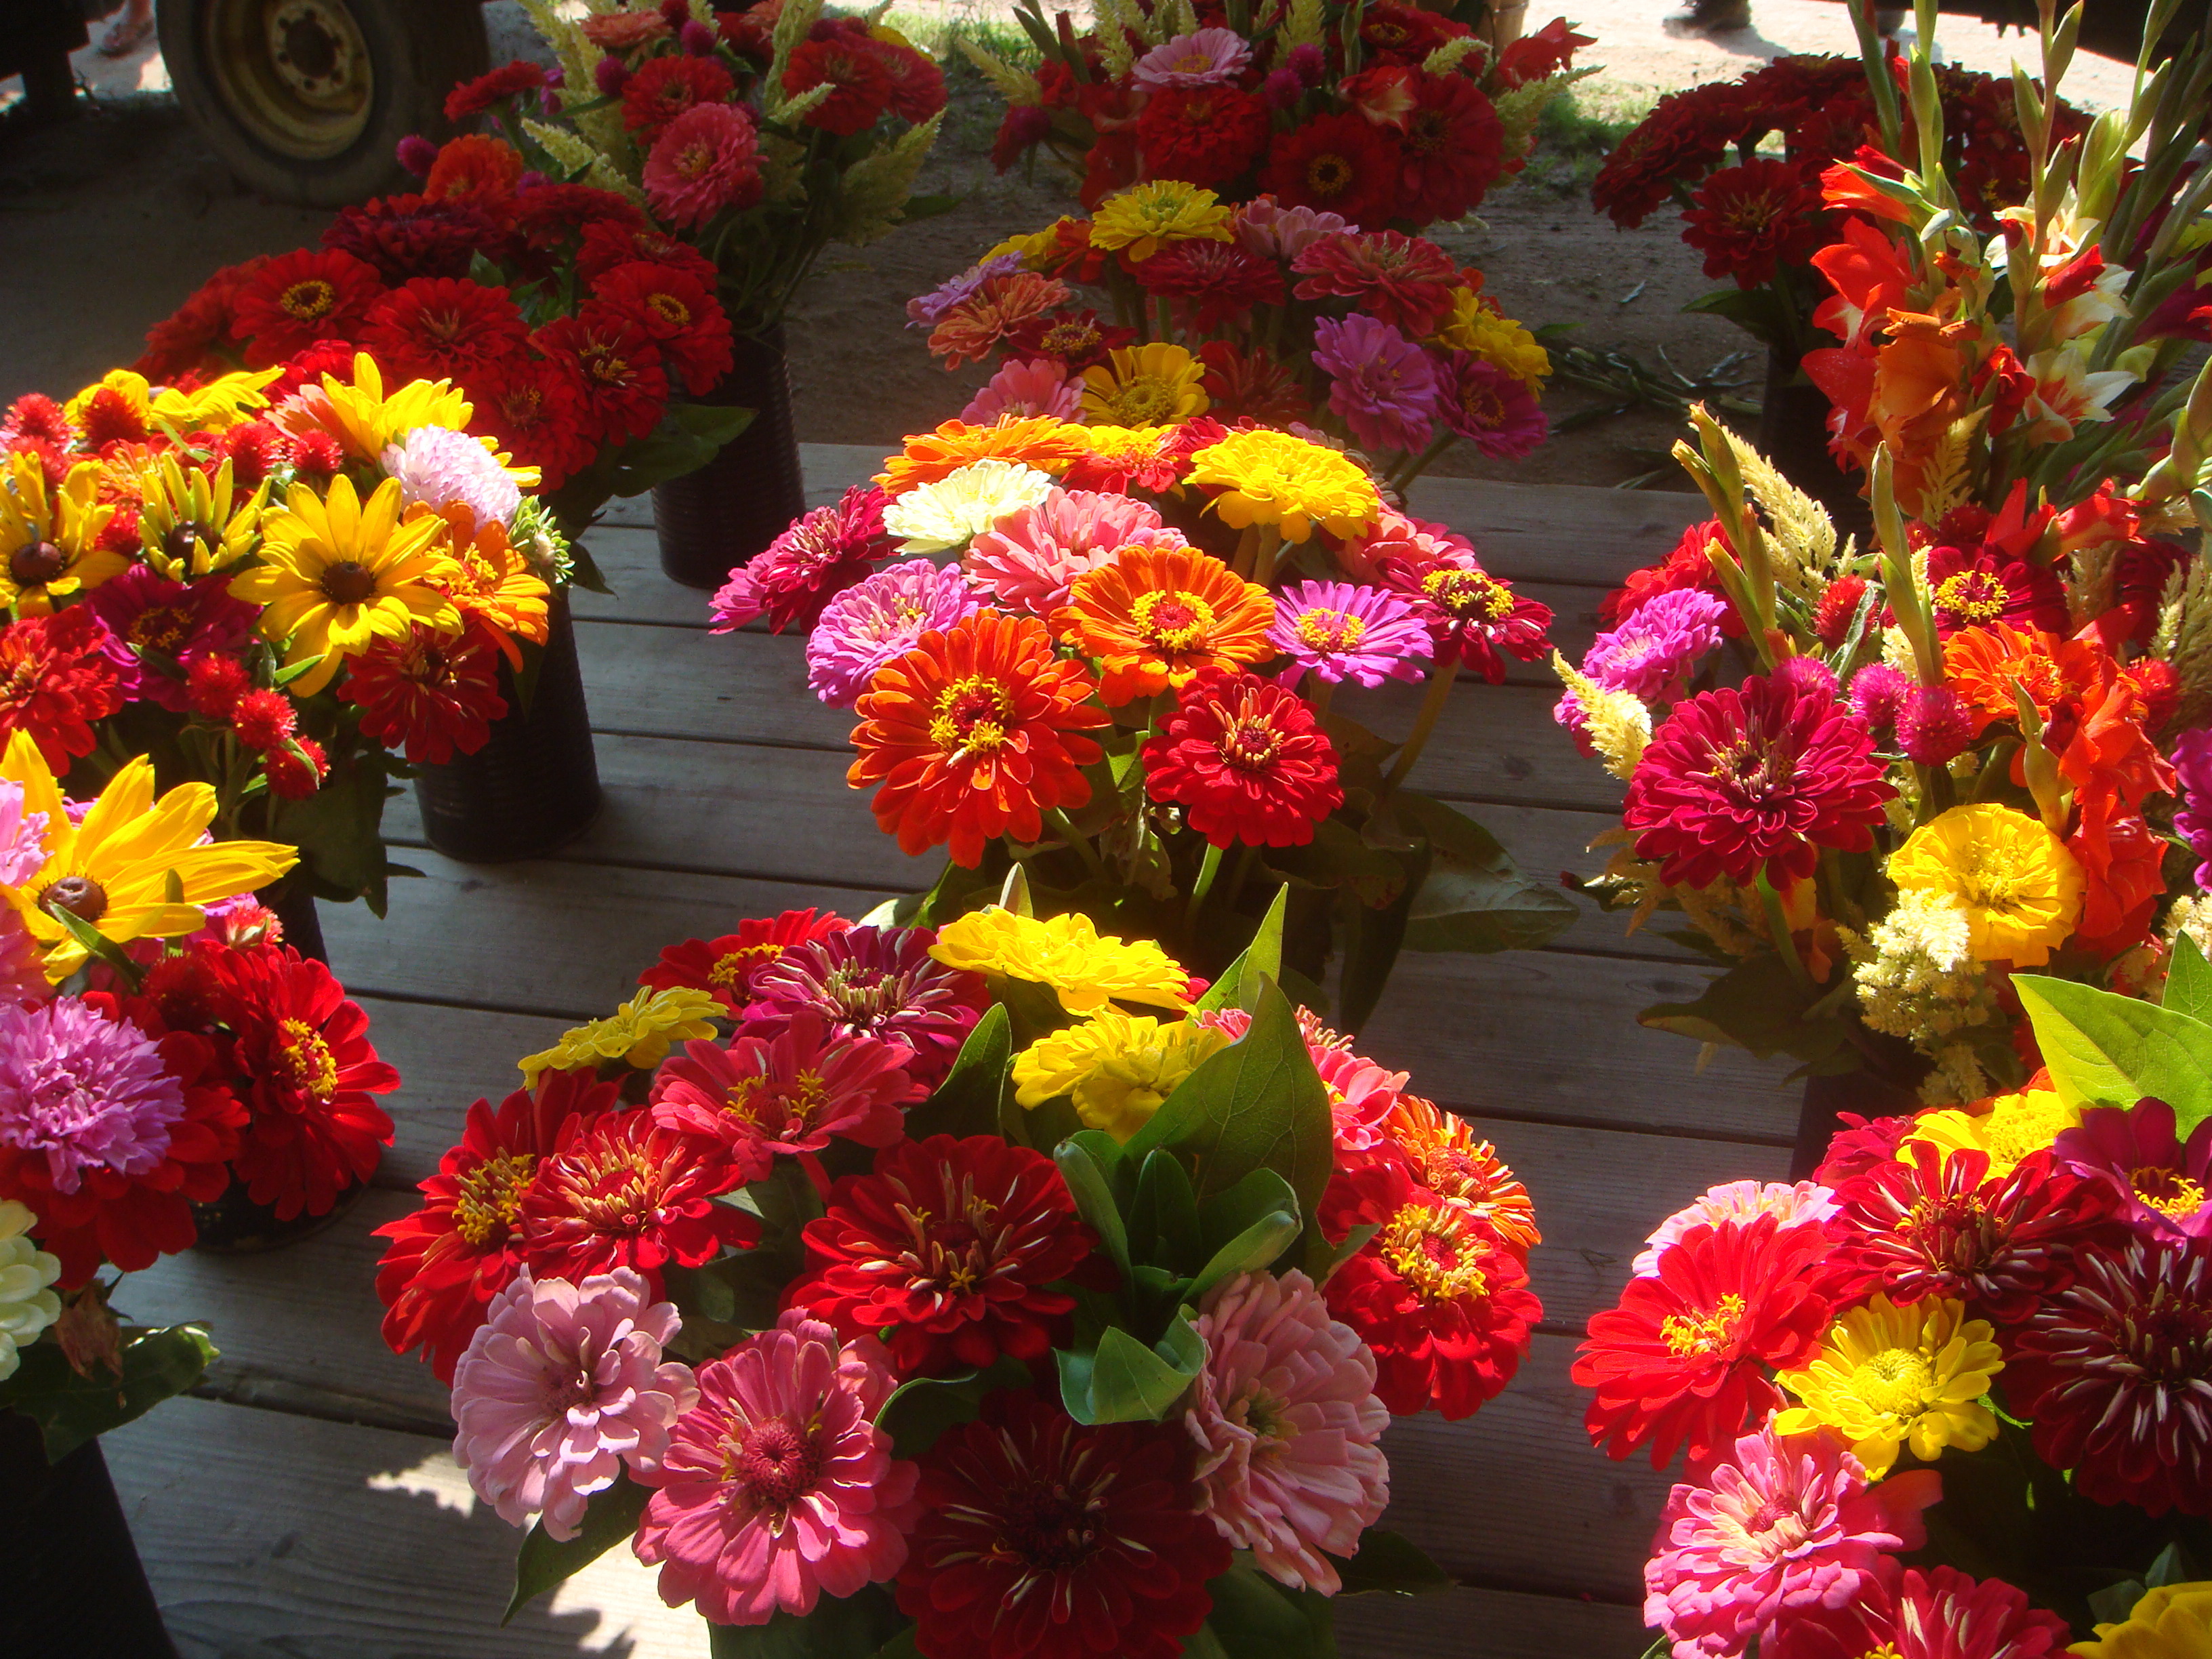 Flowers at Pike Farmstand